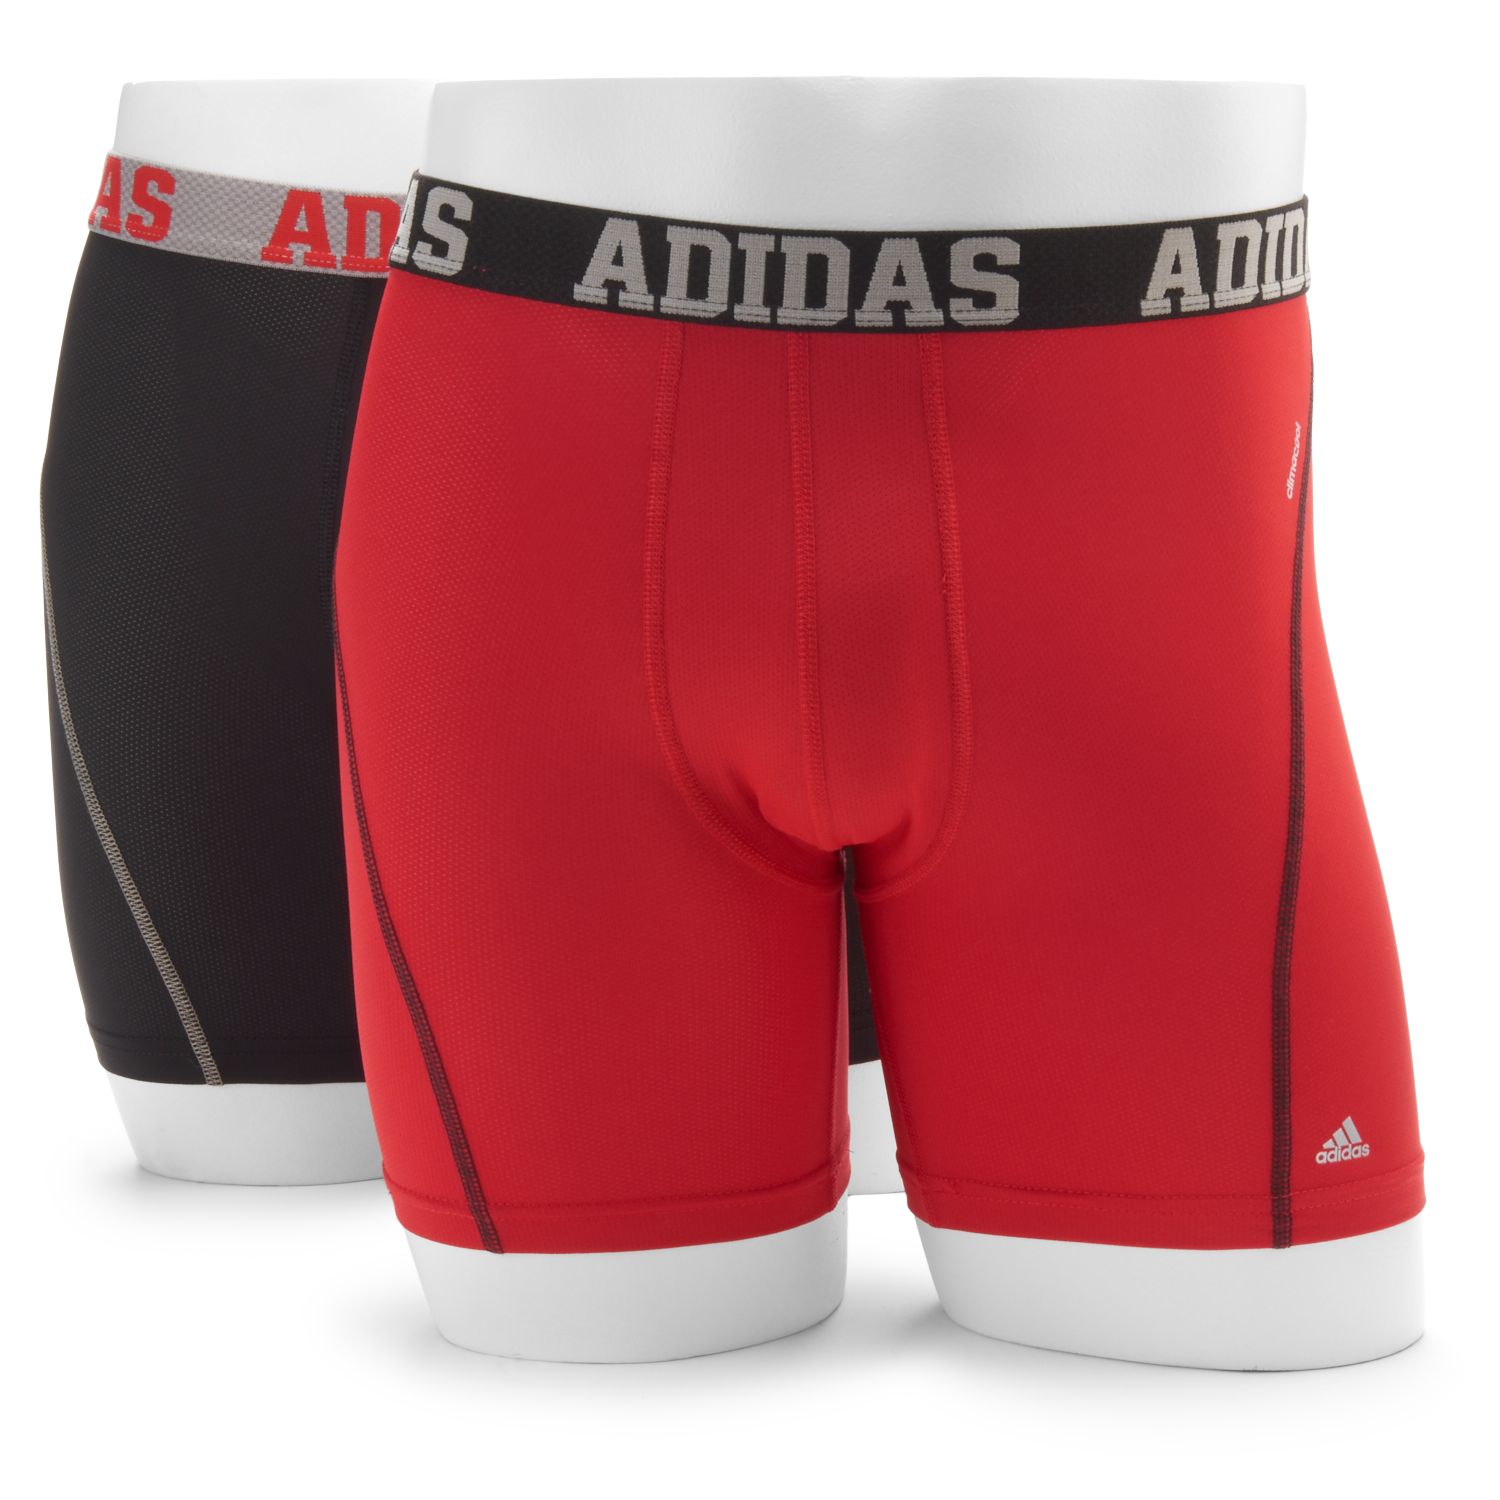 adidas climacool boxers